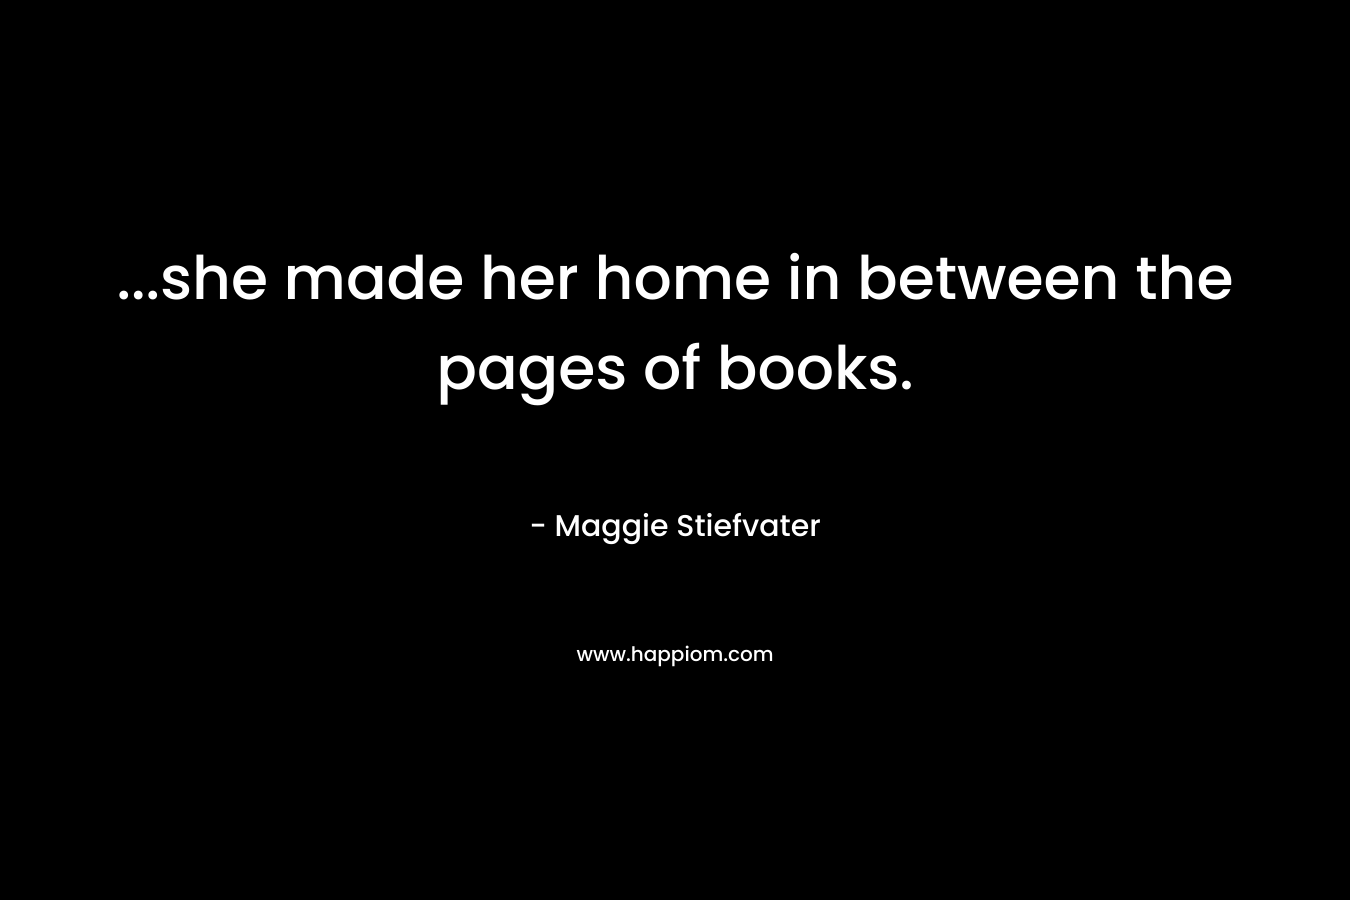 ...she made her home in between the pages of books.